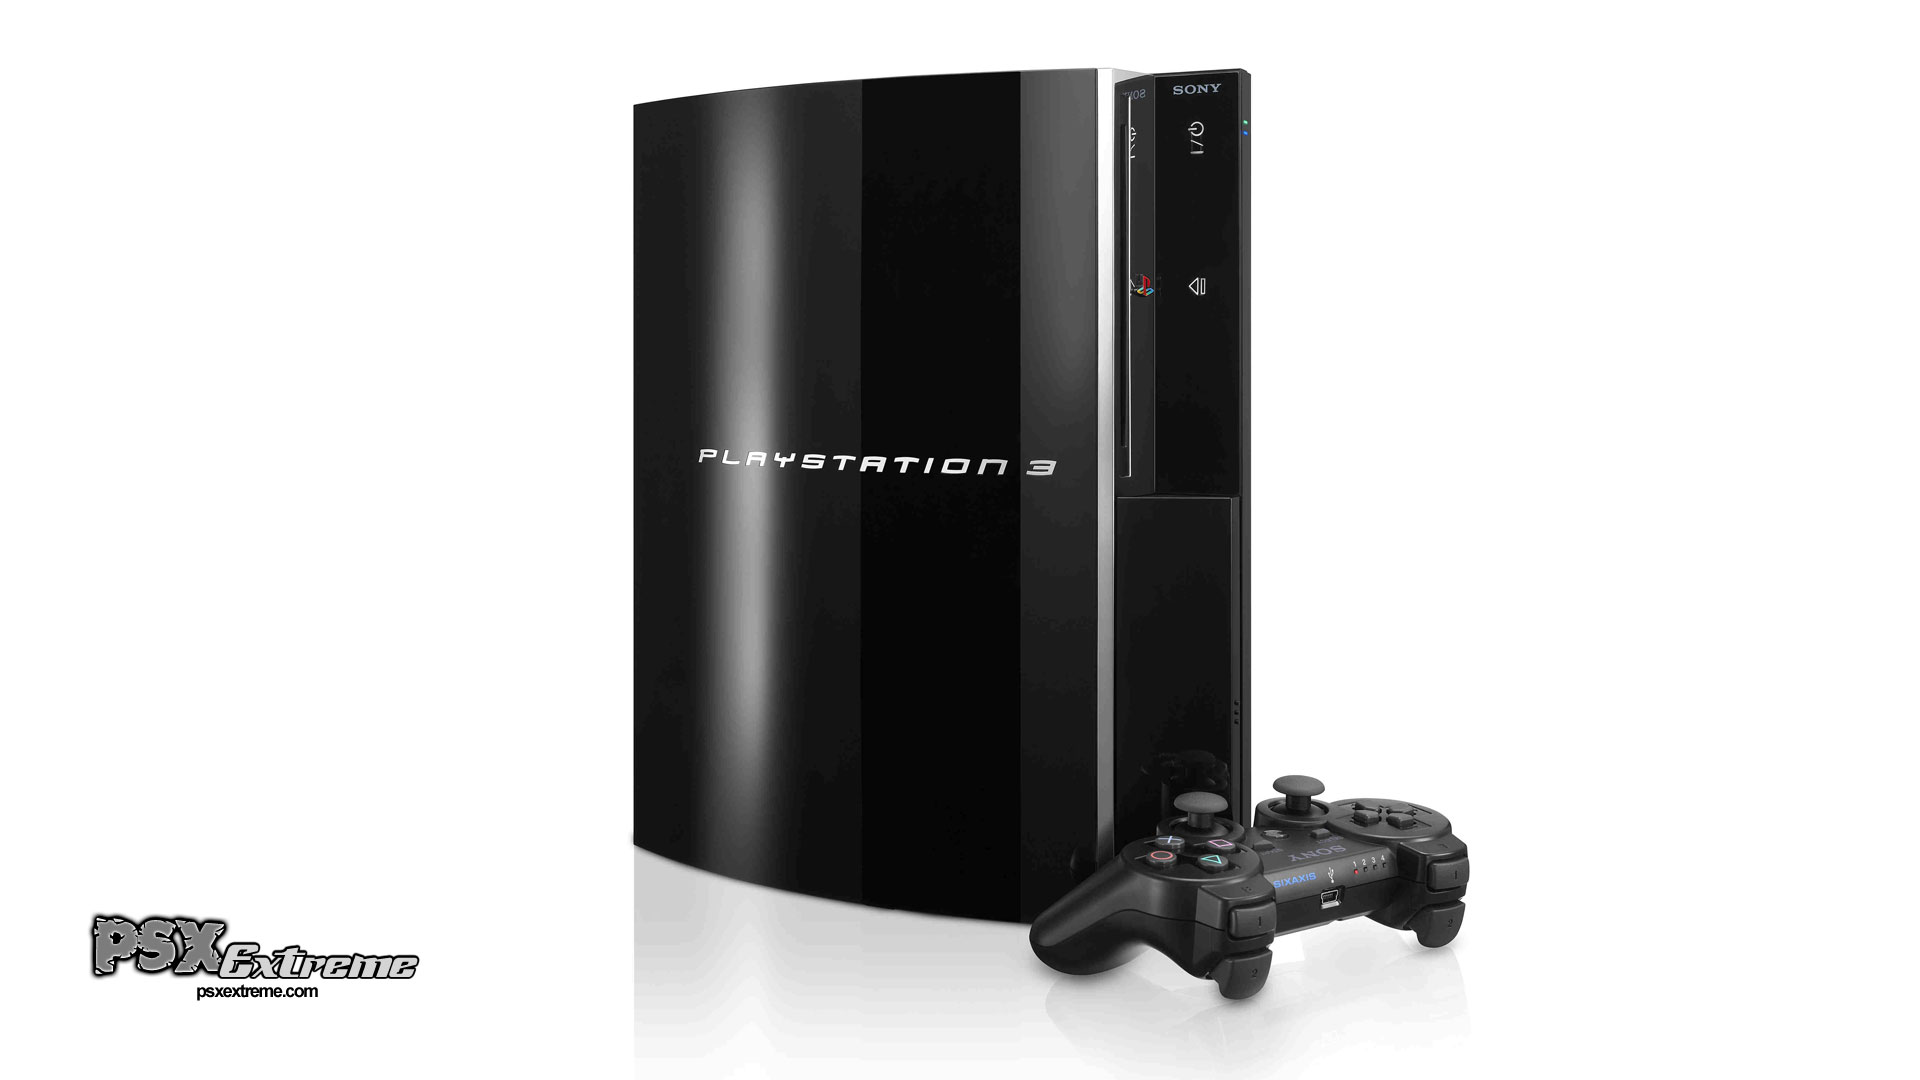 Sony Playstation 3 Wallpapers